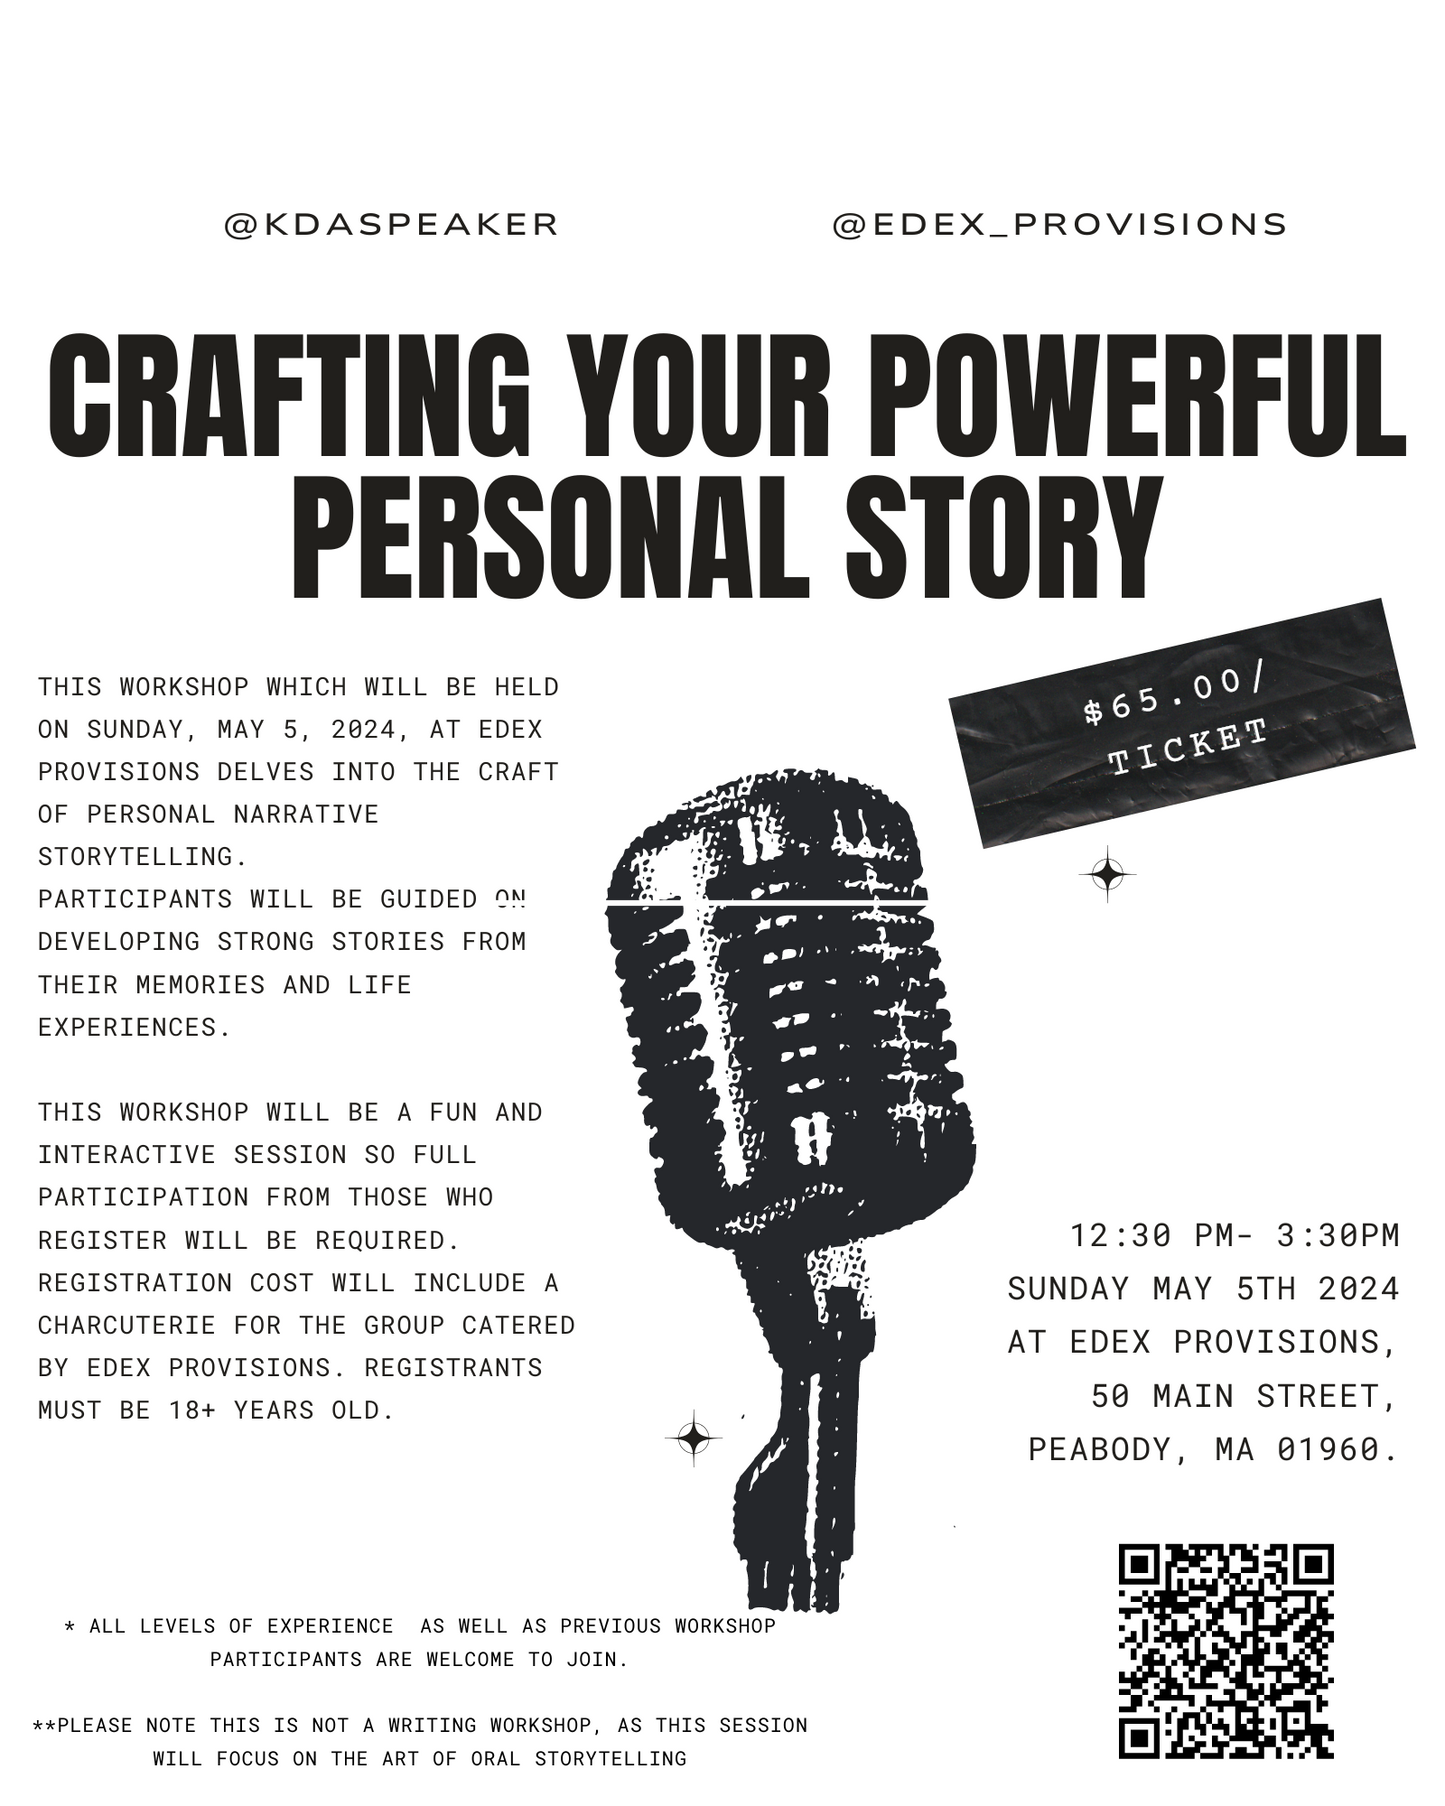 Crafting Your Powerful Personal Story